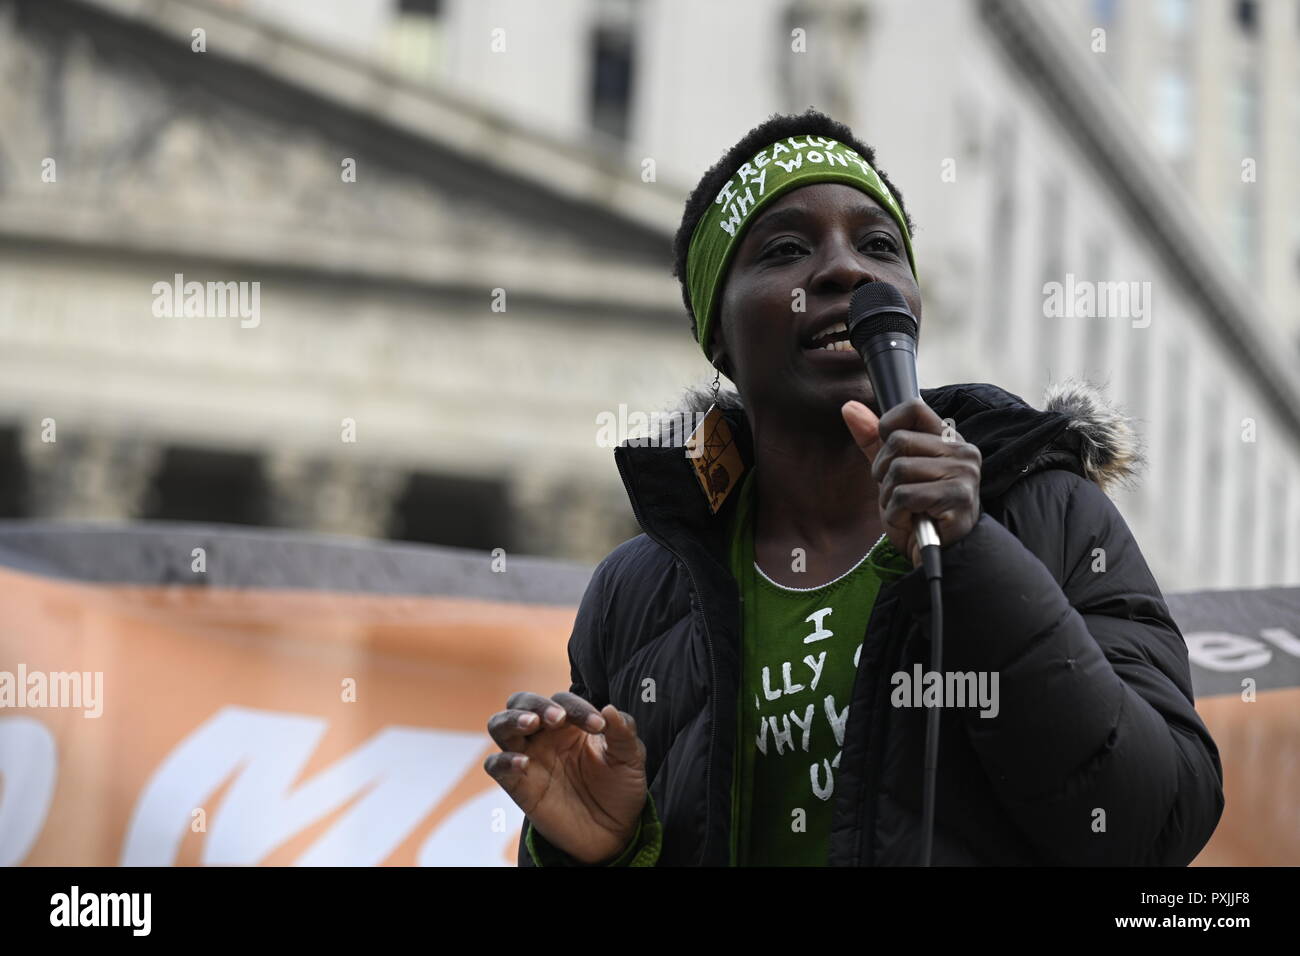 New York, USA, 22nd Oct, 2018.  Patricia Okoumou speaks at a rally against police brutality at  Foley Square in lower Manhattan.  It was one of dozens of similar events scheduled in cities across the U.S. to mark the 23rd Annual National Day of Protest to Stop Police Brutality, founded in 1996 by the October 22 Coalition. Okoumou, a Congo native, faces trial on Dec 17 on trespassing and other charges after she climbed the pedestal of the Statue of Liberty on July 4, 2018, to protest Trump administration immigration policies. Credit: Joseph Reid/Alamy Live News Stock Photo